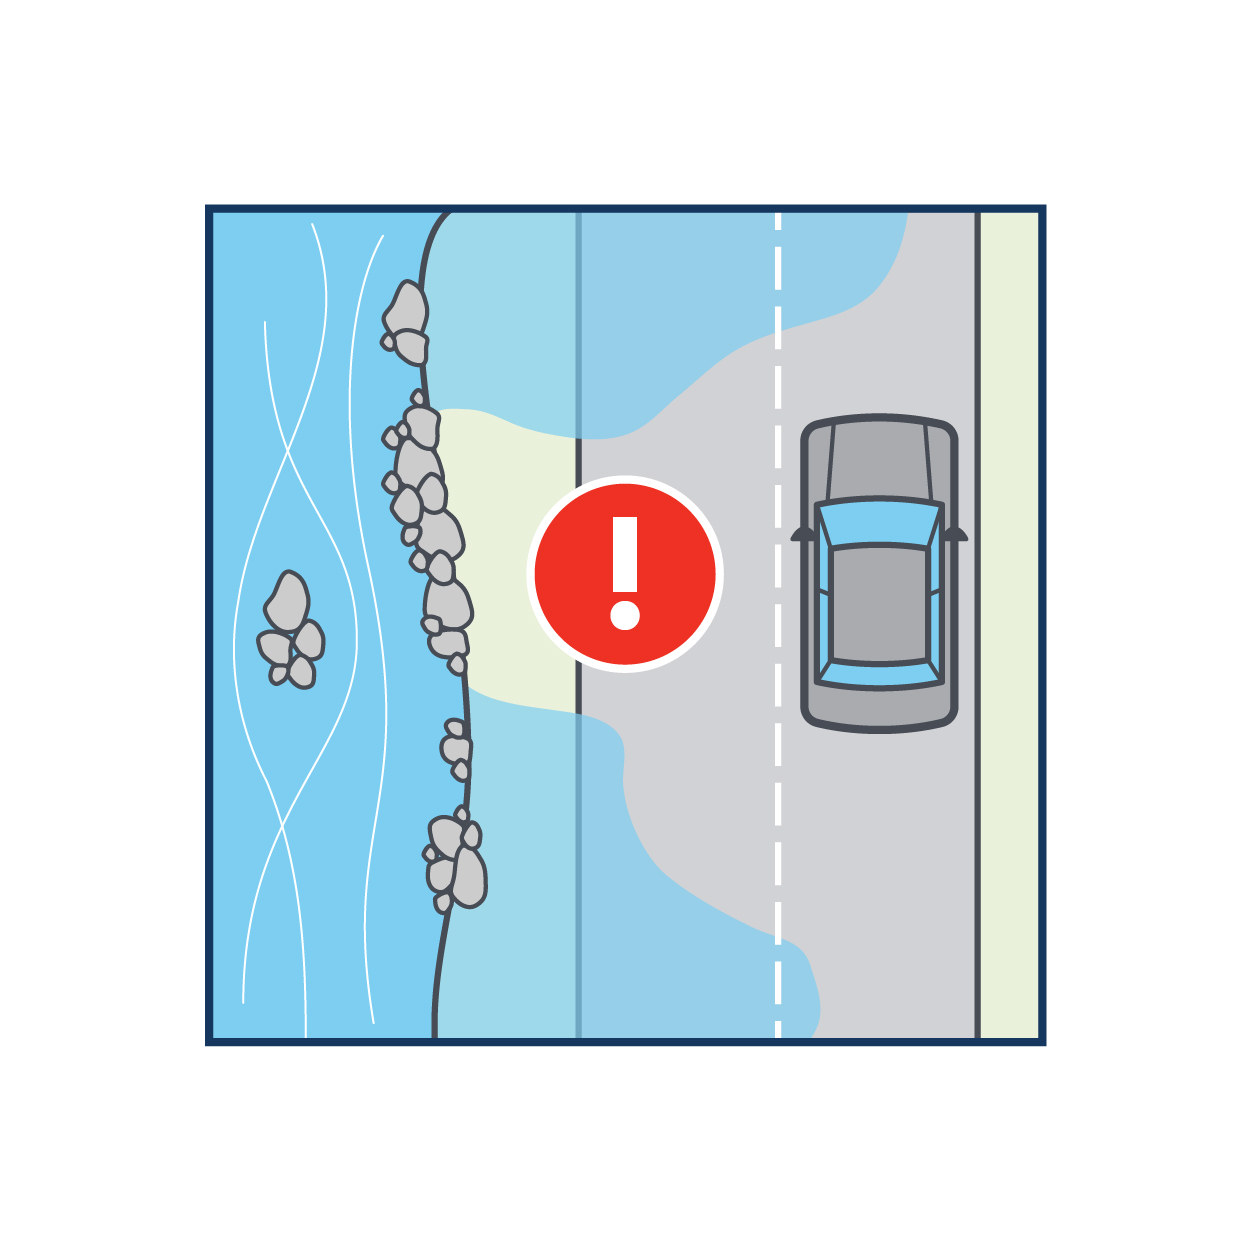 Car on a road covered in water with a red warning exclamation point 